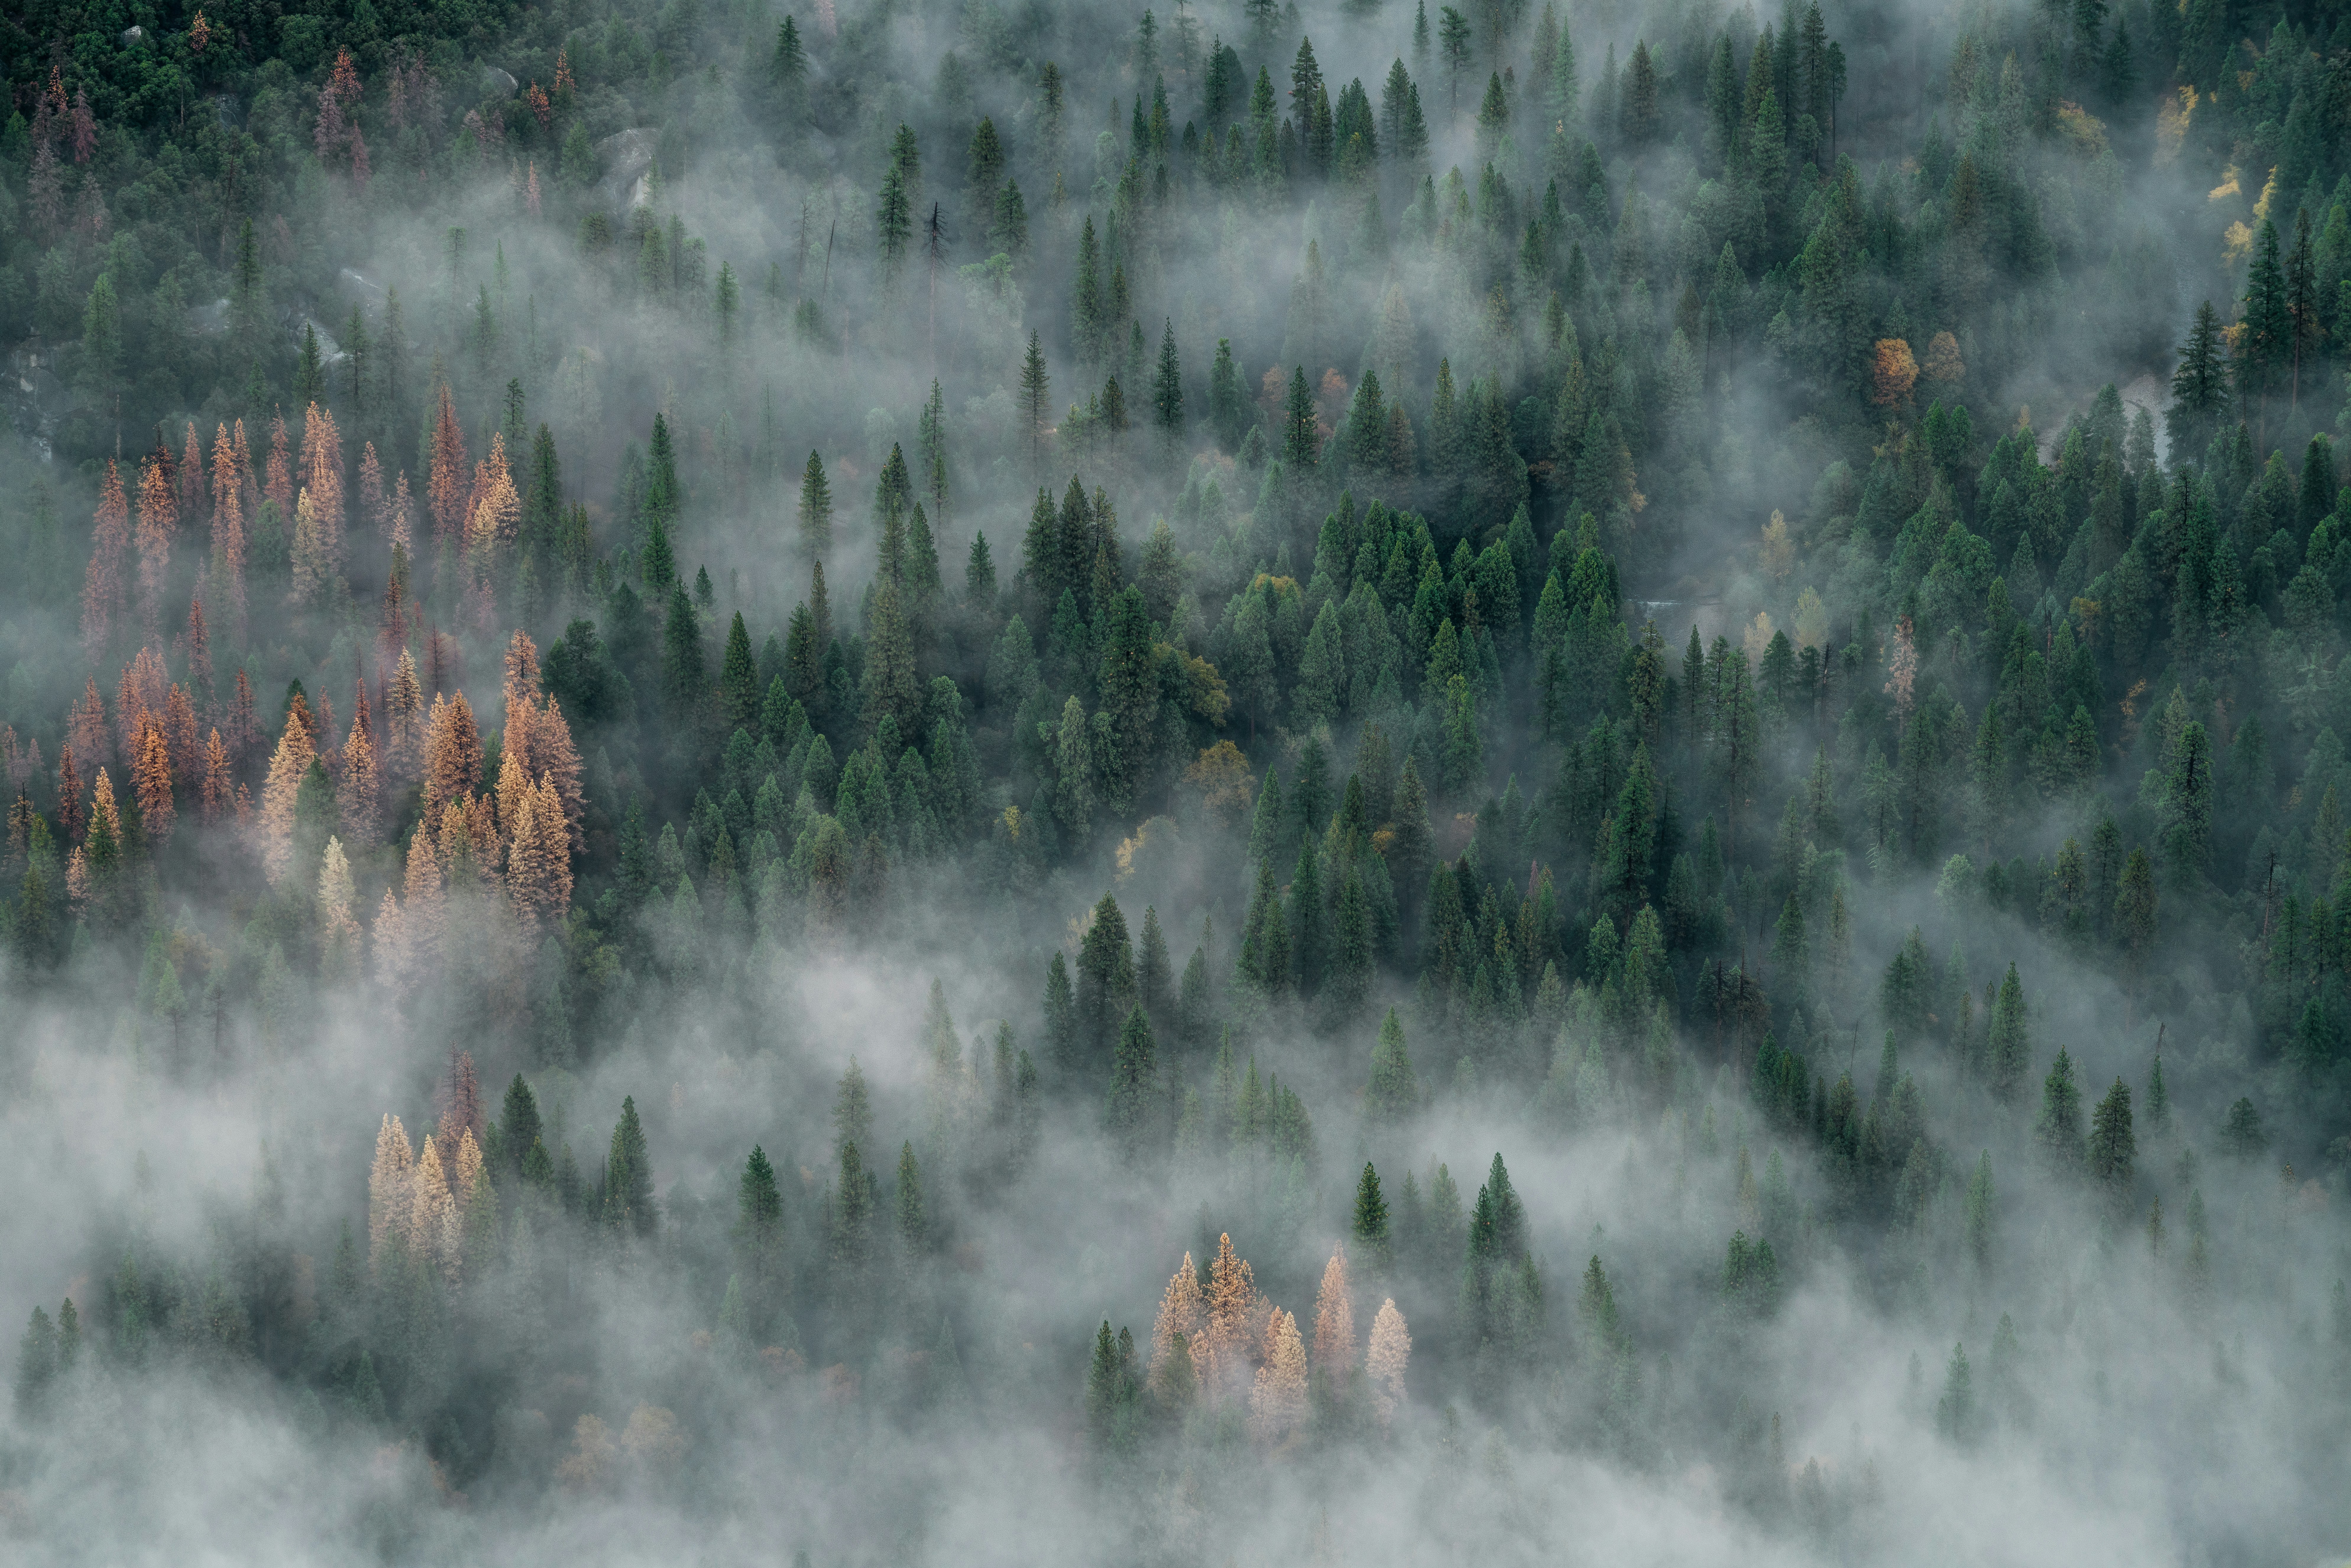 We were looking to capture a foggy sunrise view of Half-Dome in Yosemite, but the weather wasn’t cooperating with us. The fog that did show up was low-lying and moving quickly through the trees like a ghostly river meandering through the canyon, swirling around the tallest trees in small eddies. Like too many forests, the valley is infested with borers, which has killed thousands of trees. The splash of golden trees mixed with the green is actually really beautiful, but a sad reminder of how fragile the forest is.